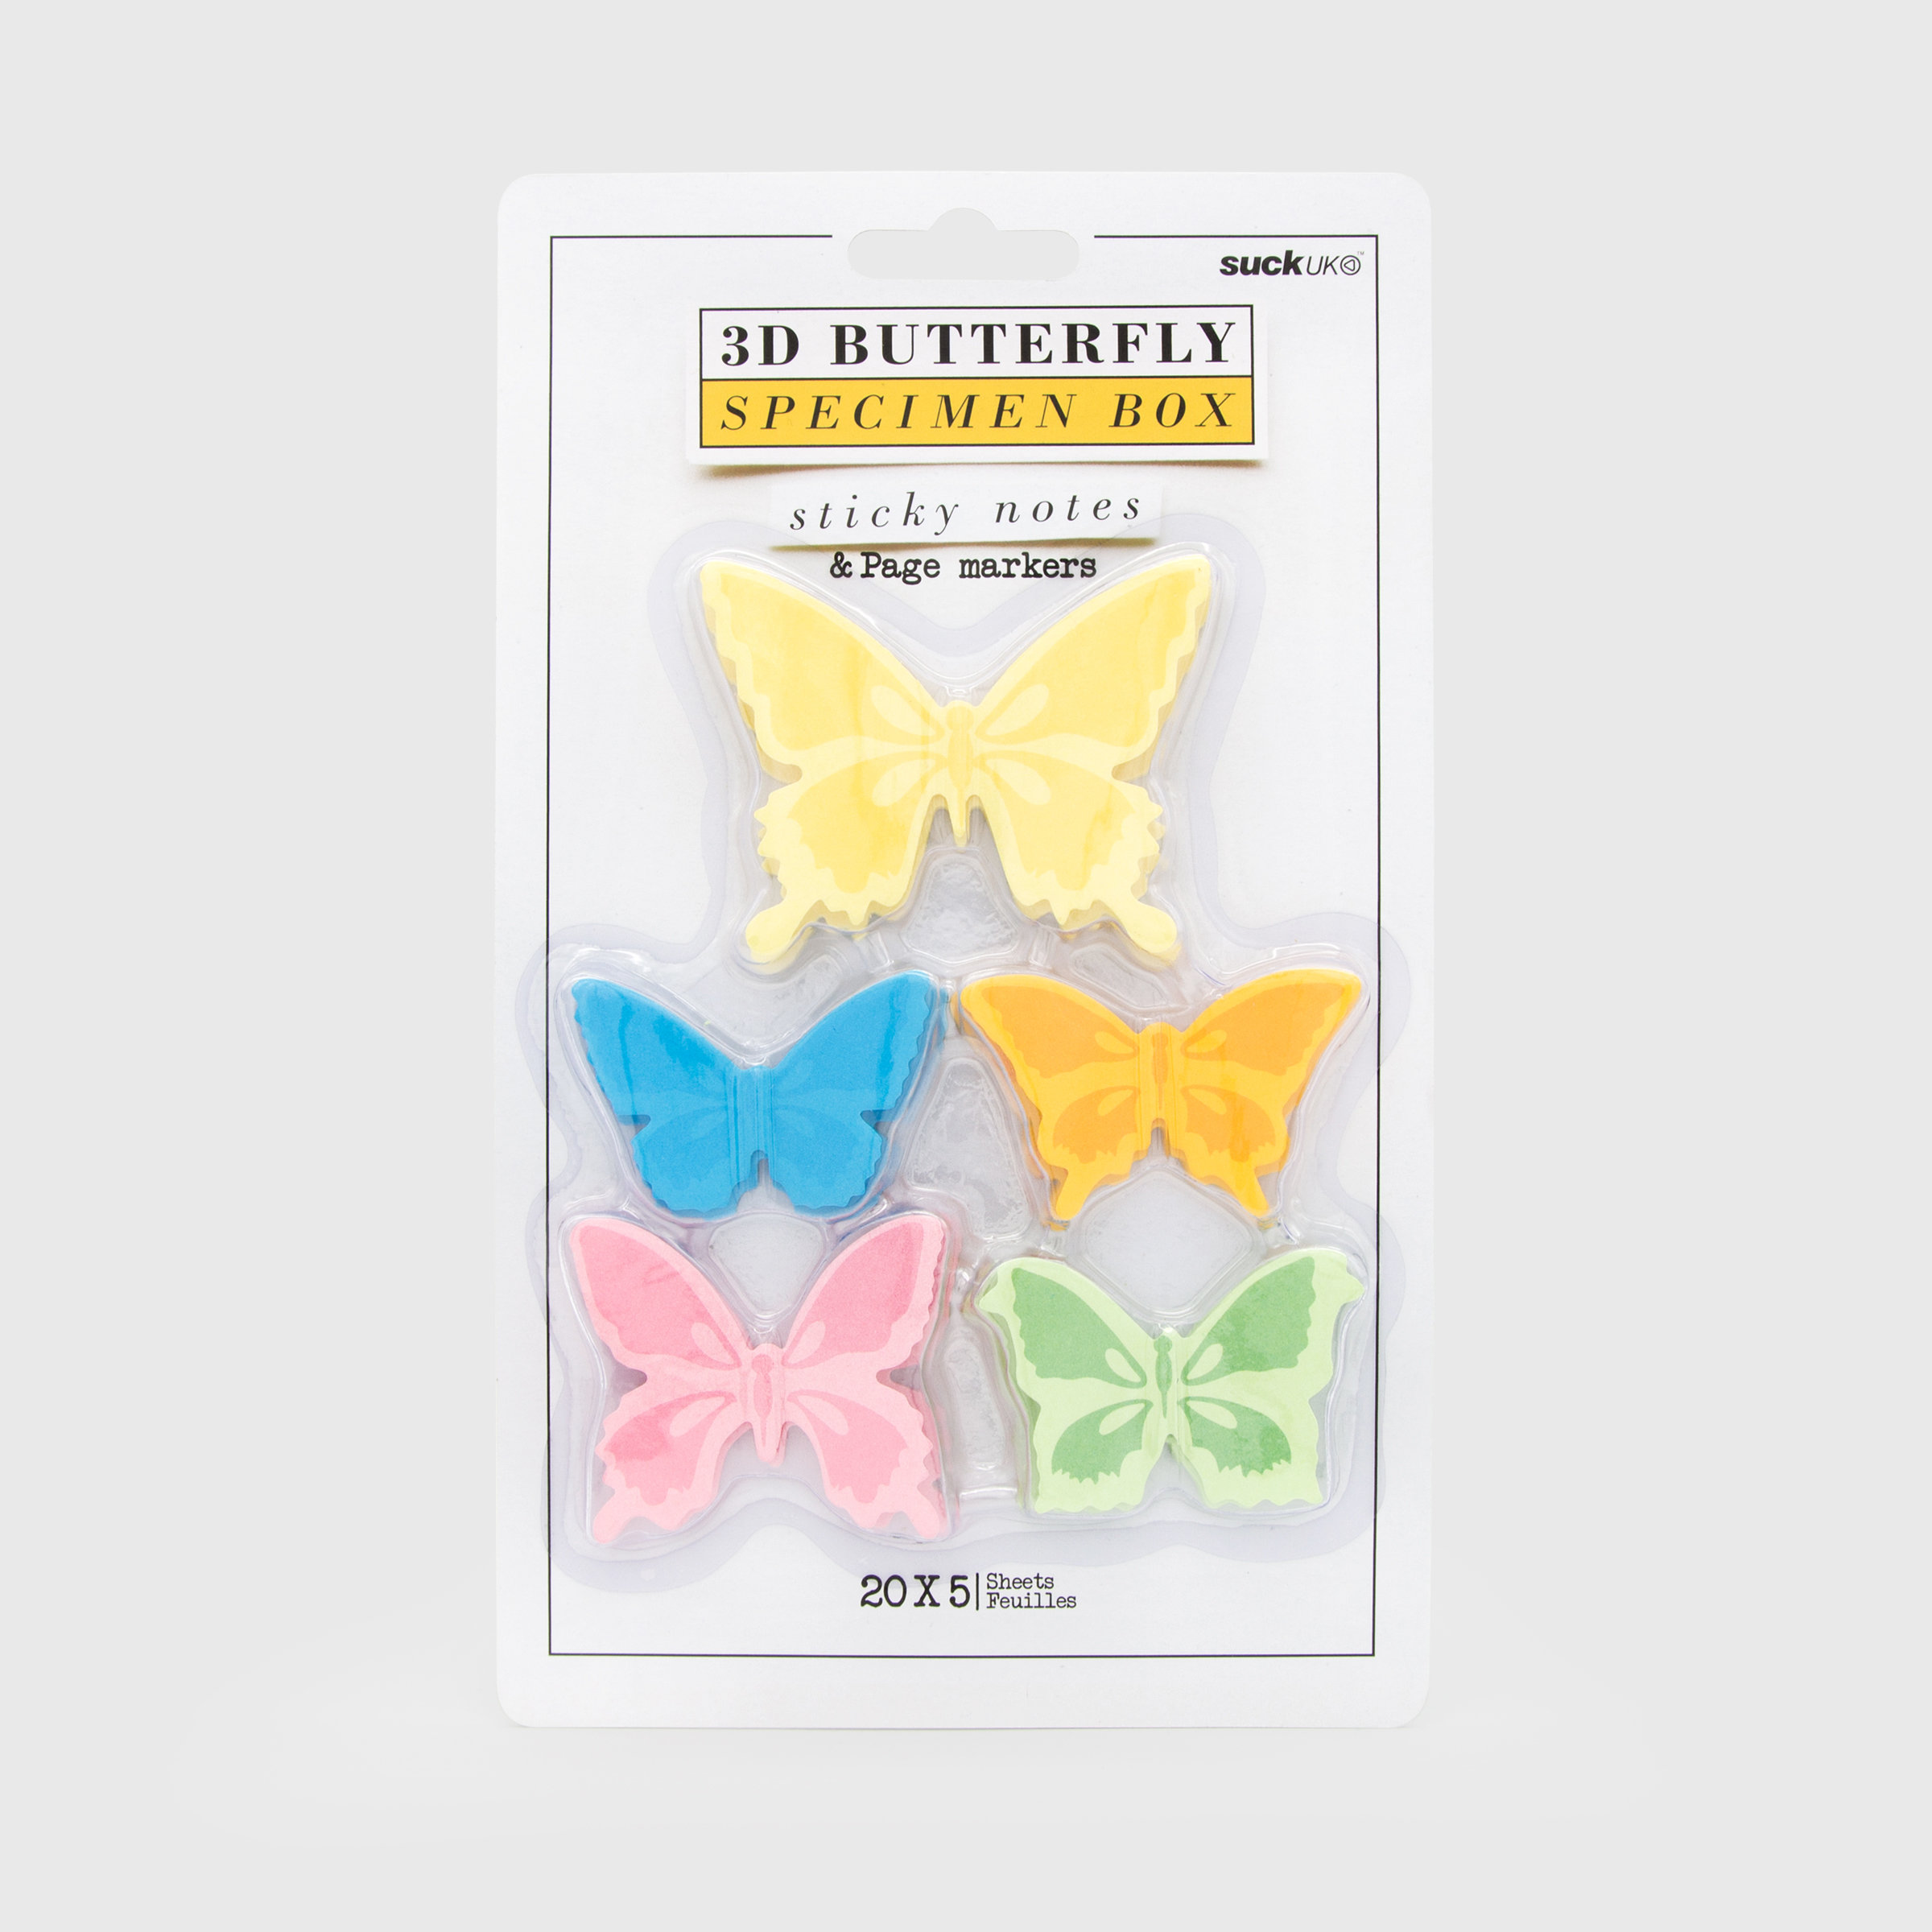 Butterfly sticky notes in specimen box style packaging